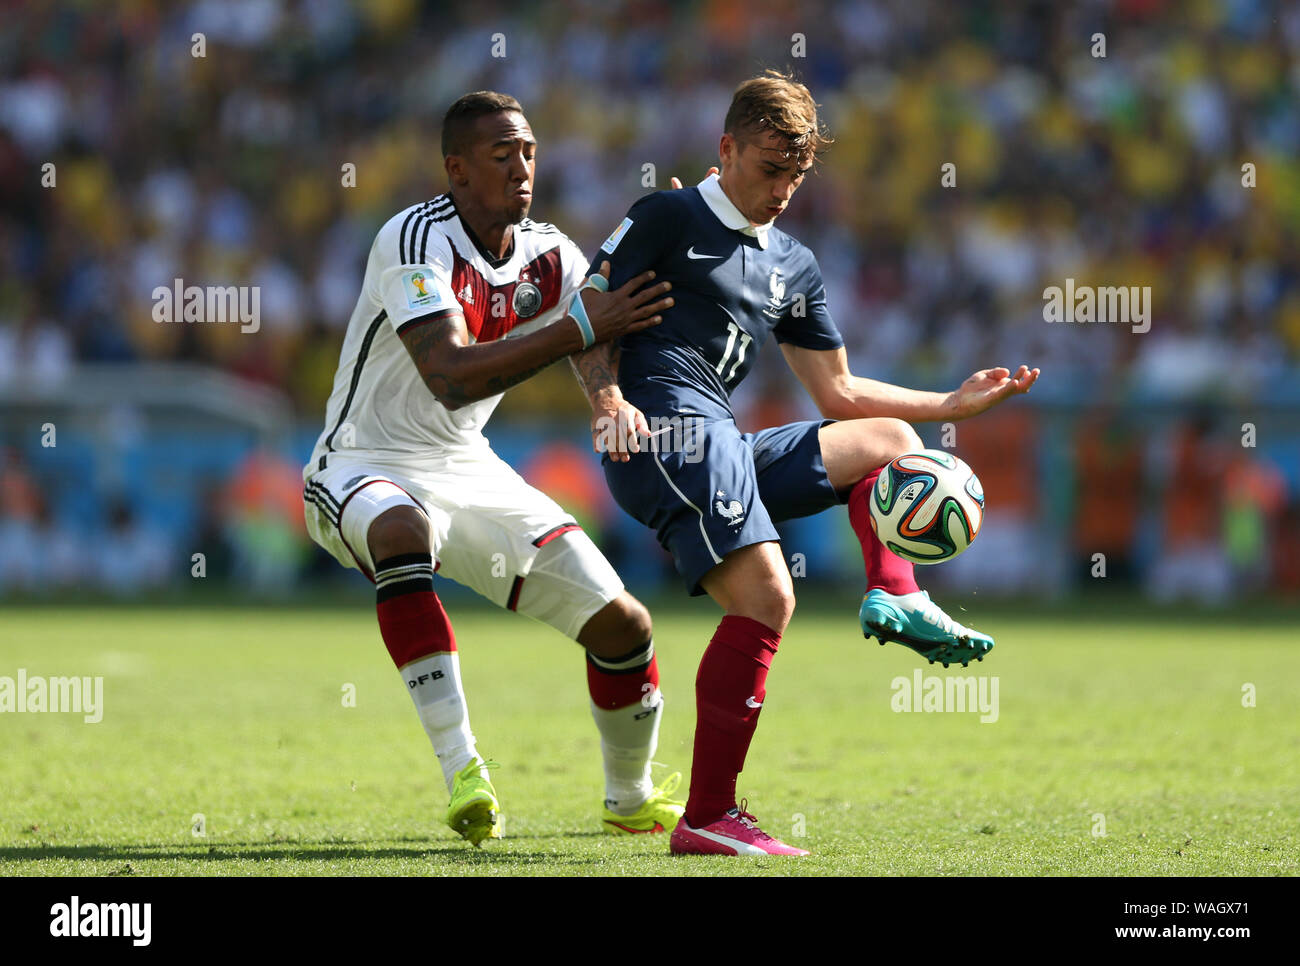 Rio de Janeiro, July 4, 2014. French soccer player Griezmann, playing for France and Germany during the 2014 World Cup at the Maracanã Stadium in Rio Stock Photo